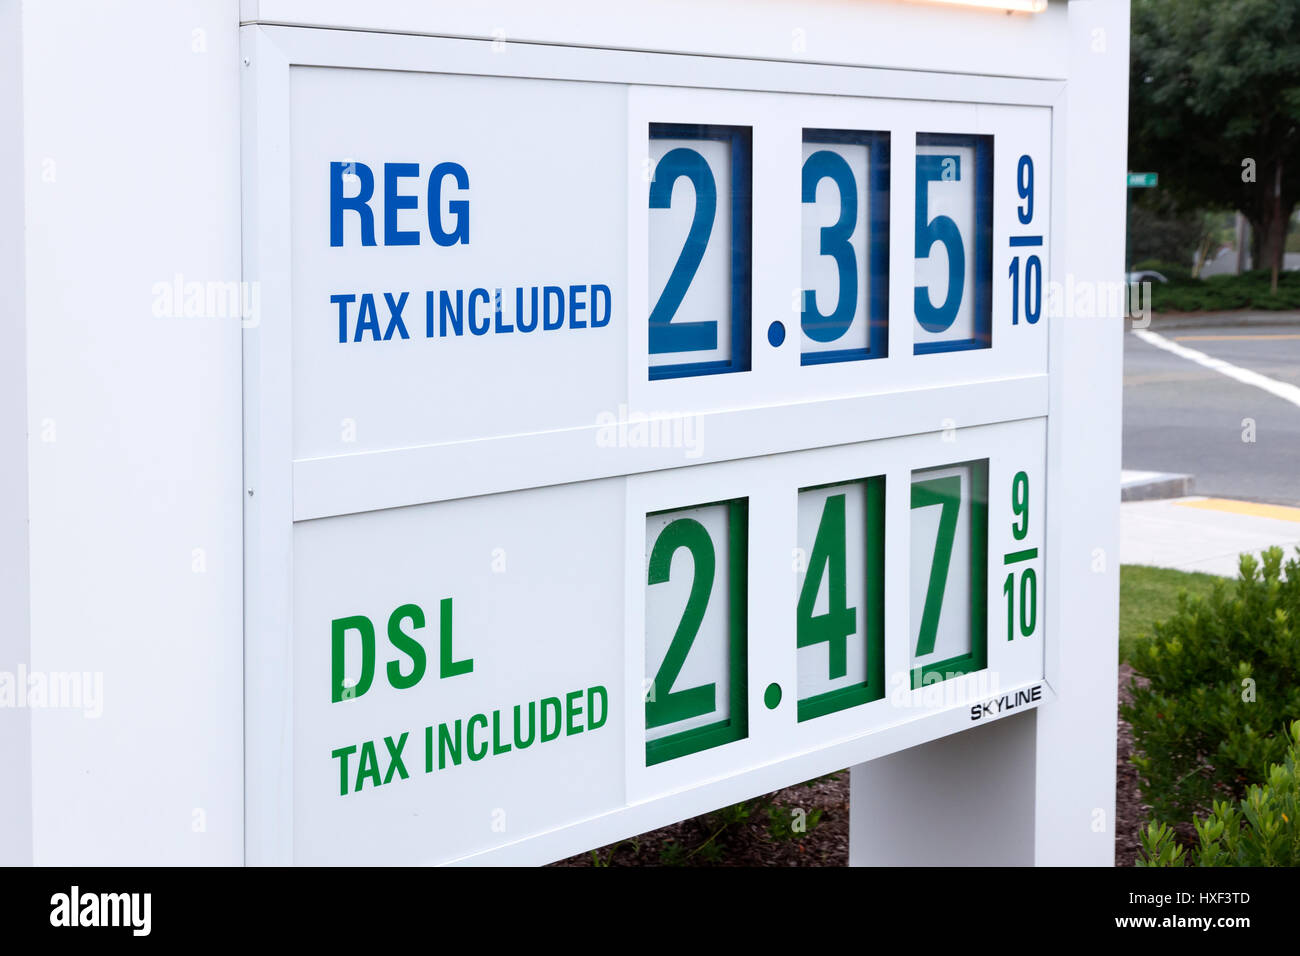 Low gasoline prices on a gas station sign. Stock Photo